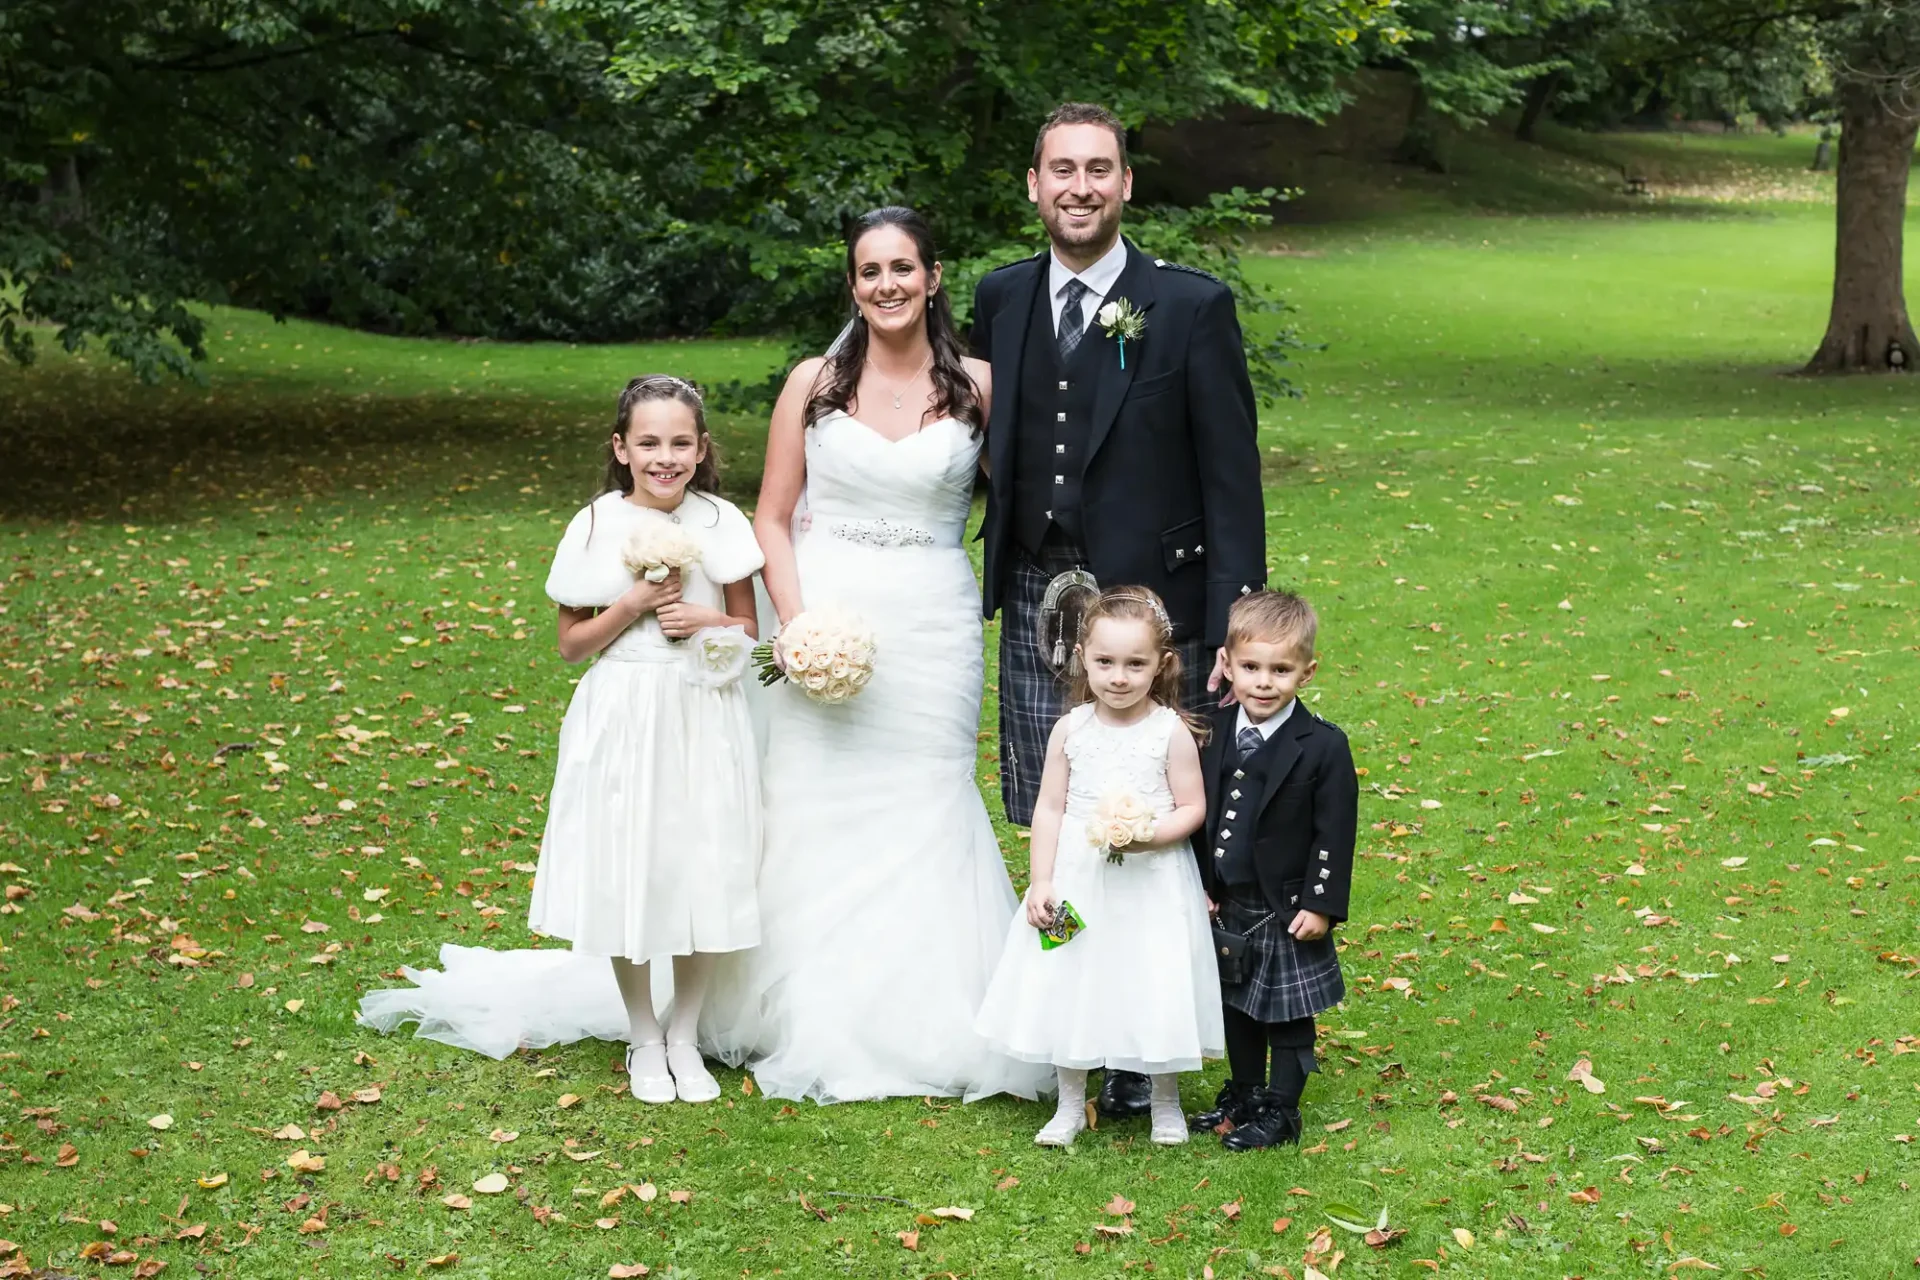 A bride and groom posing with three children in a park, the girls in dresses and the boy in a kilt, all smiling.